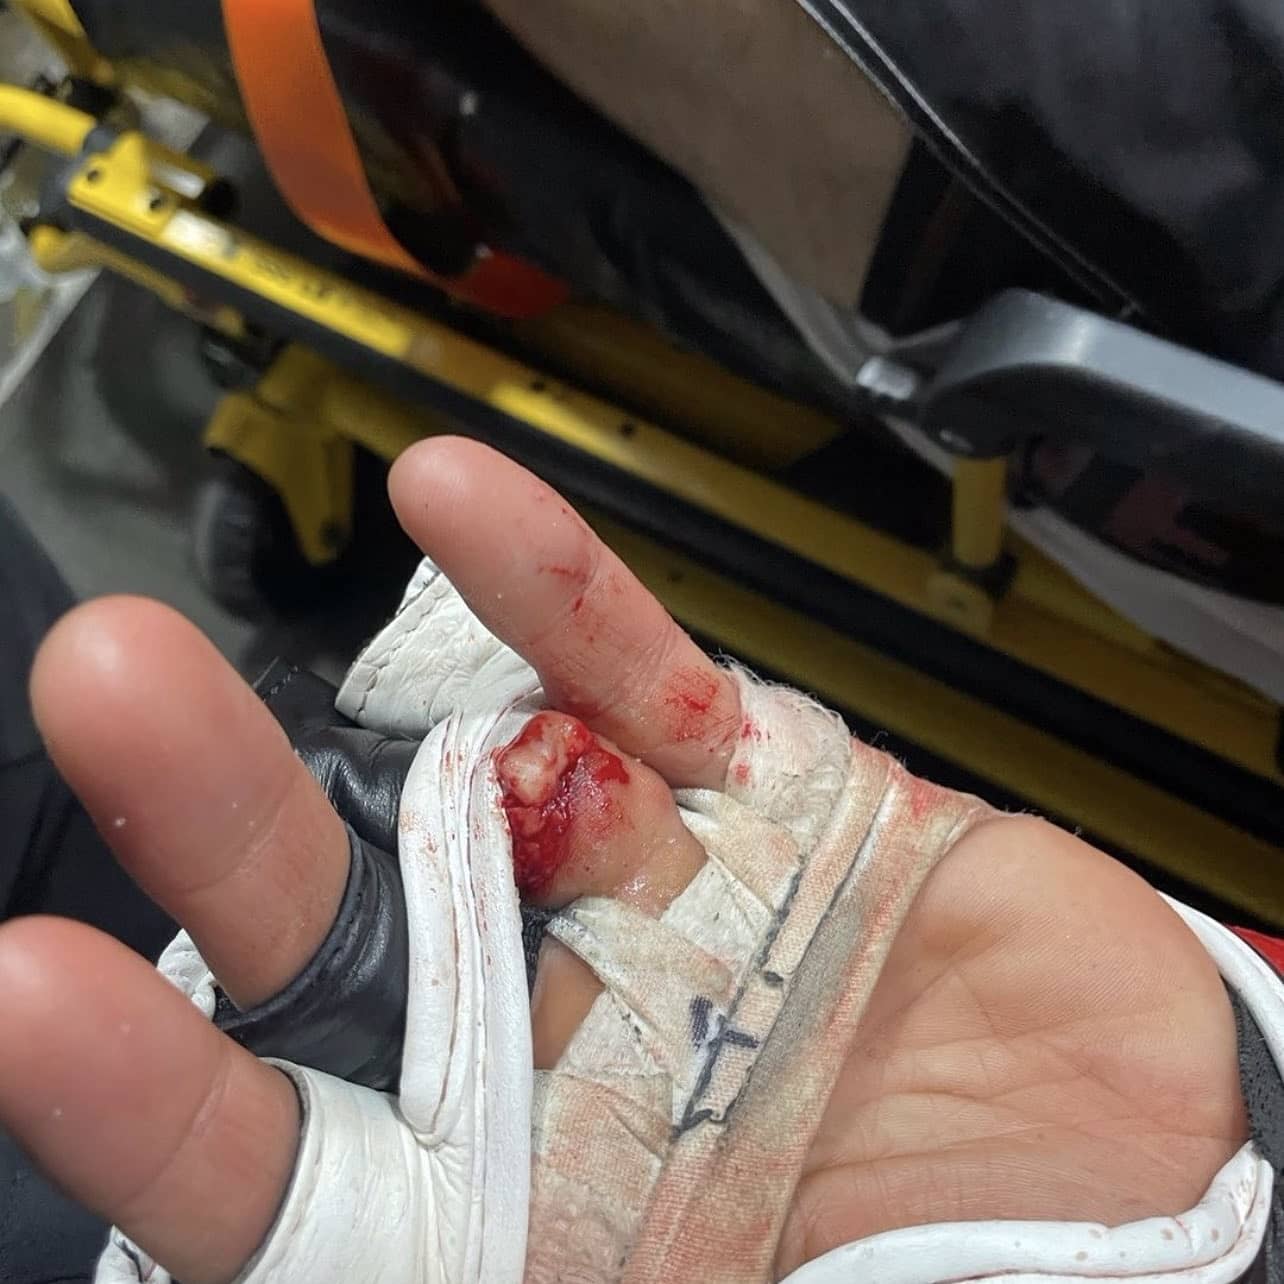 MMA fighter Khetag Pliev from Ossetia fought a whole round with a severed finger.